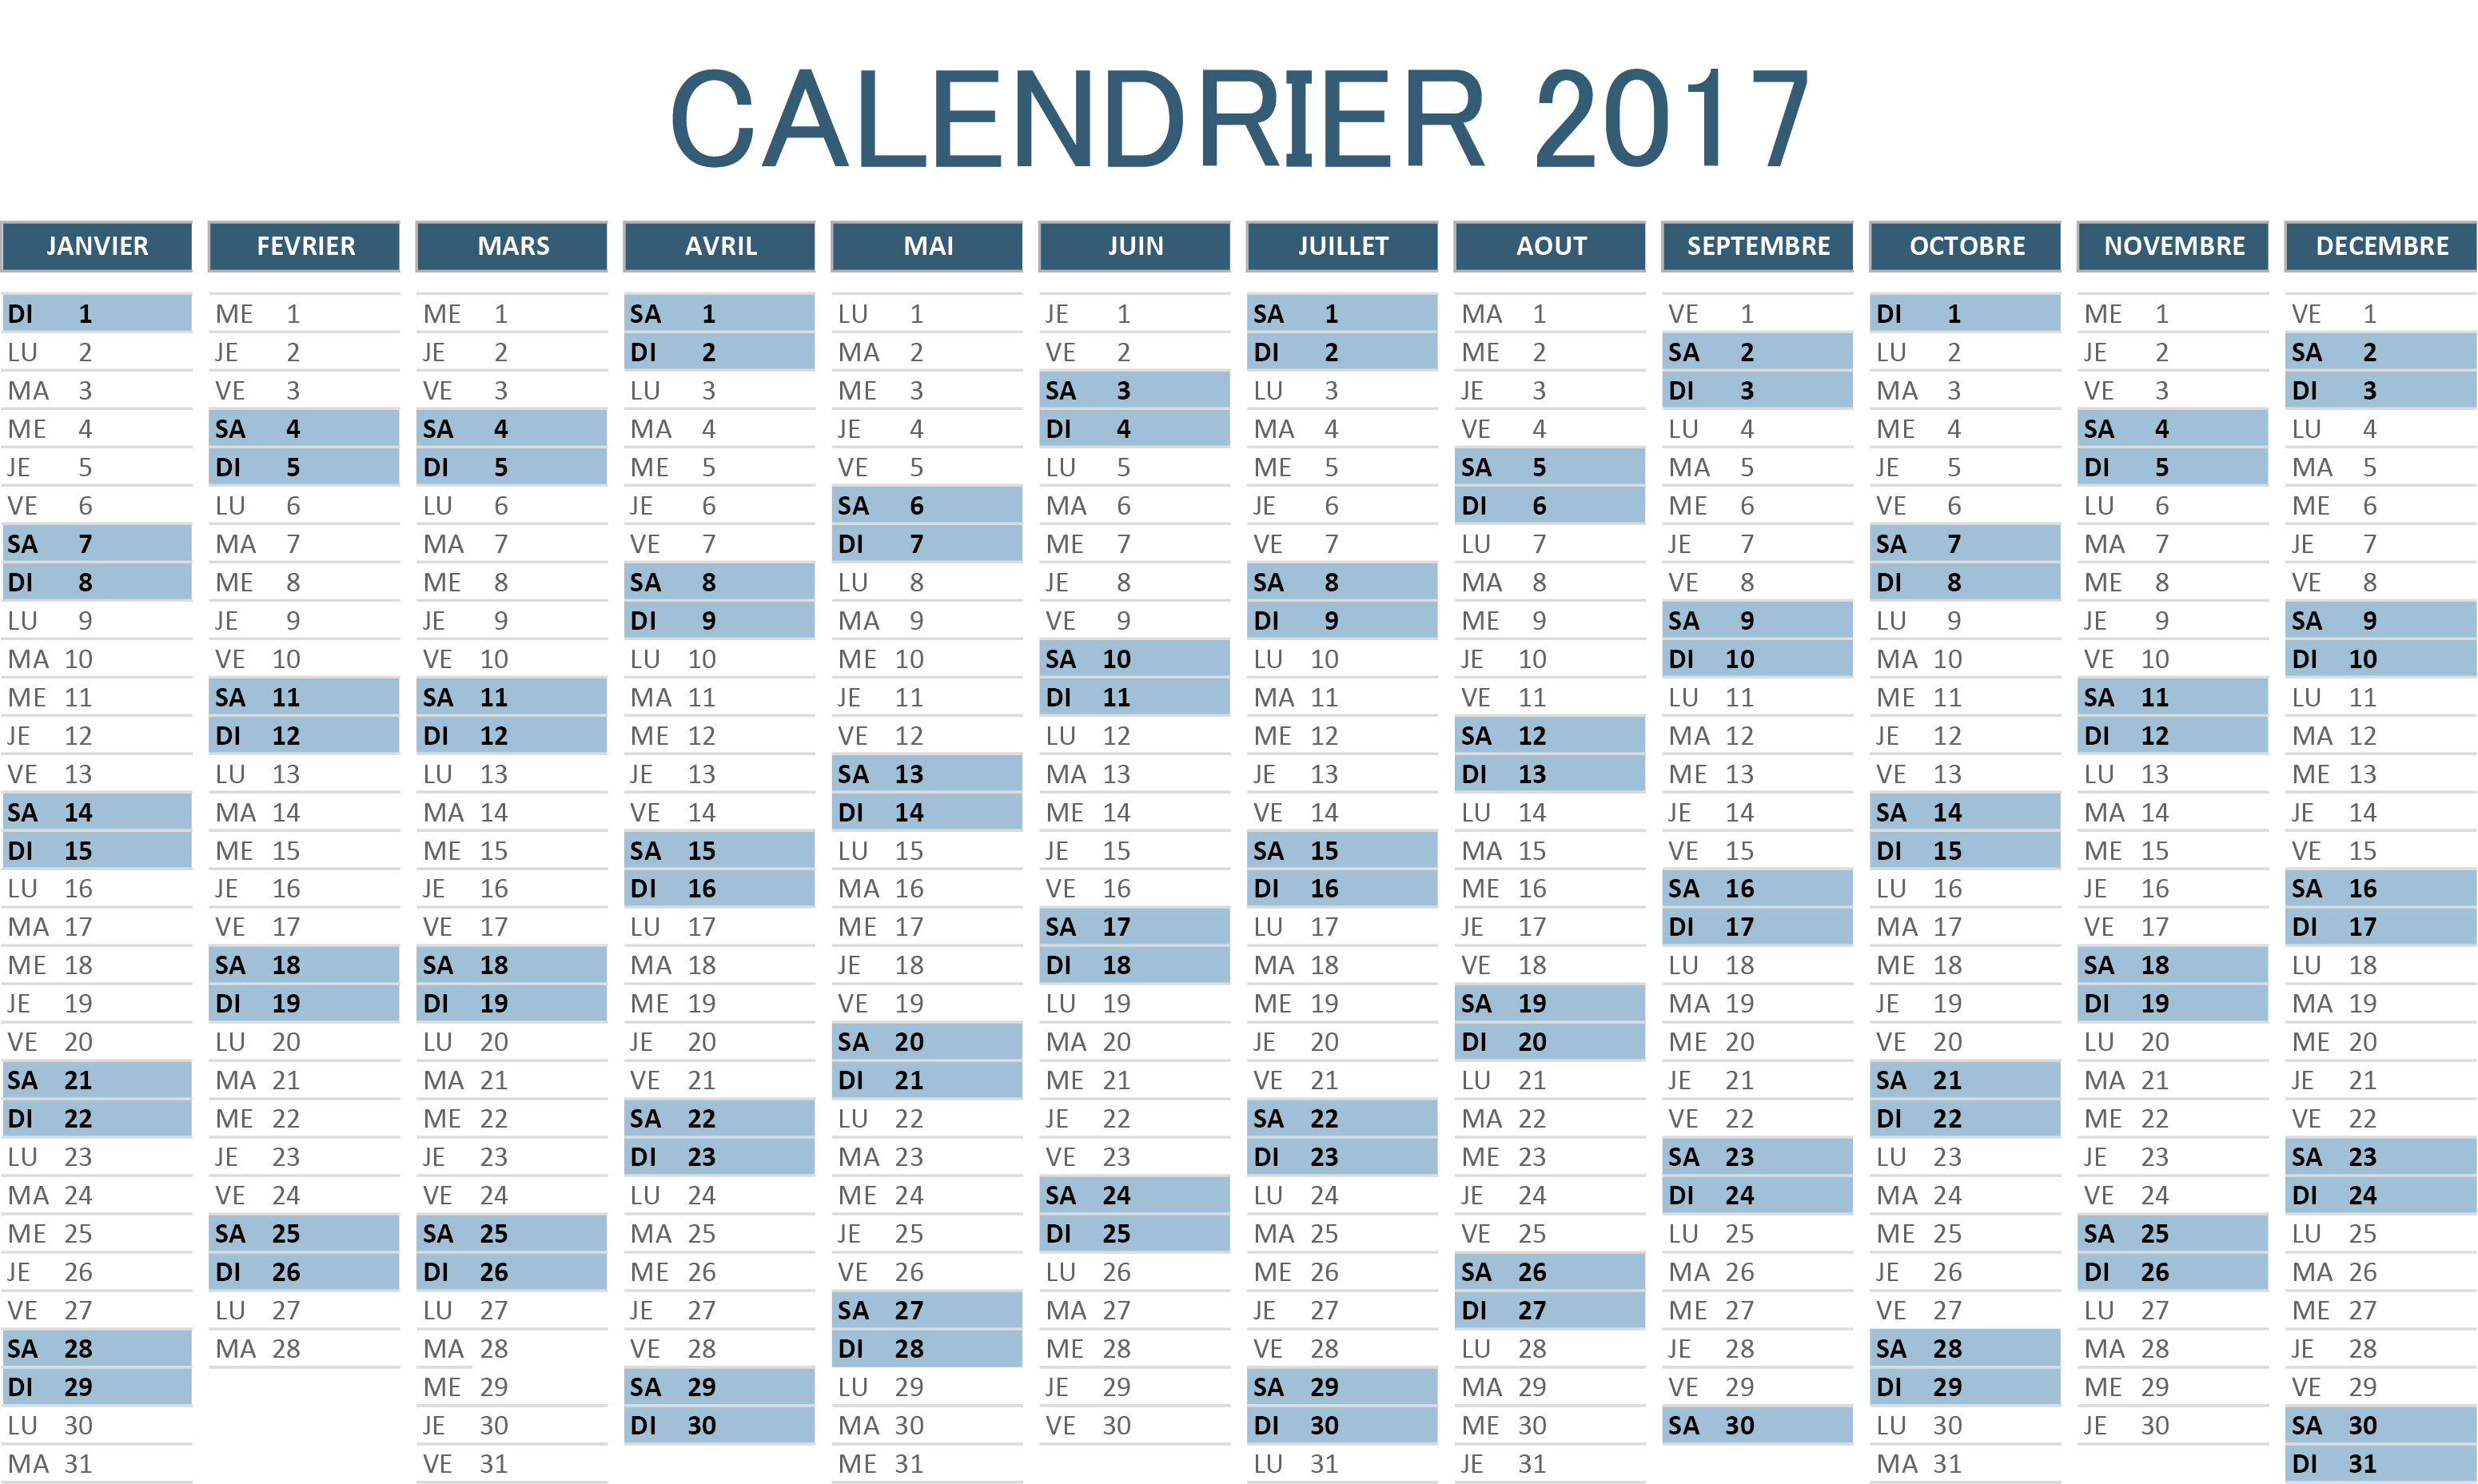 Calendrier 2017 excel